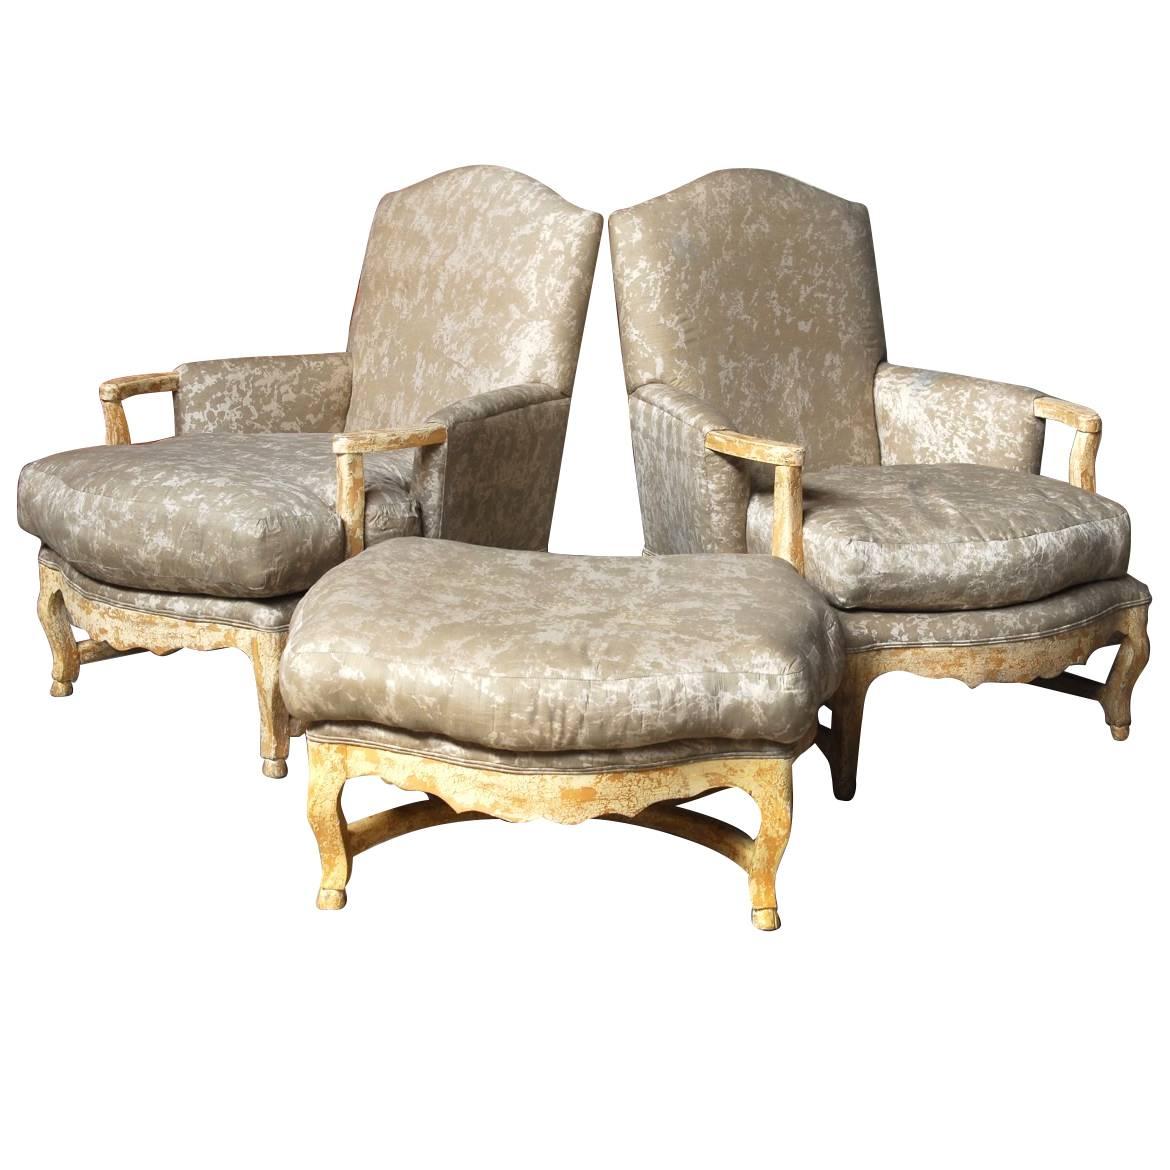 Pair of Country French Bergere Armchairs with Ottoman